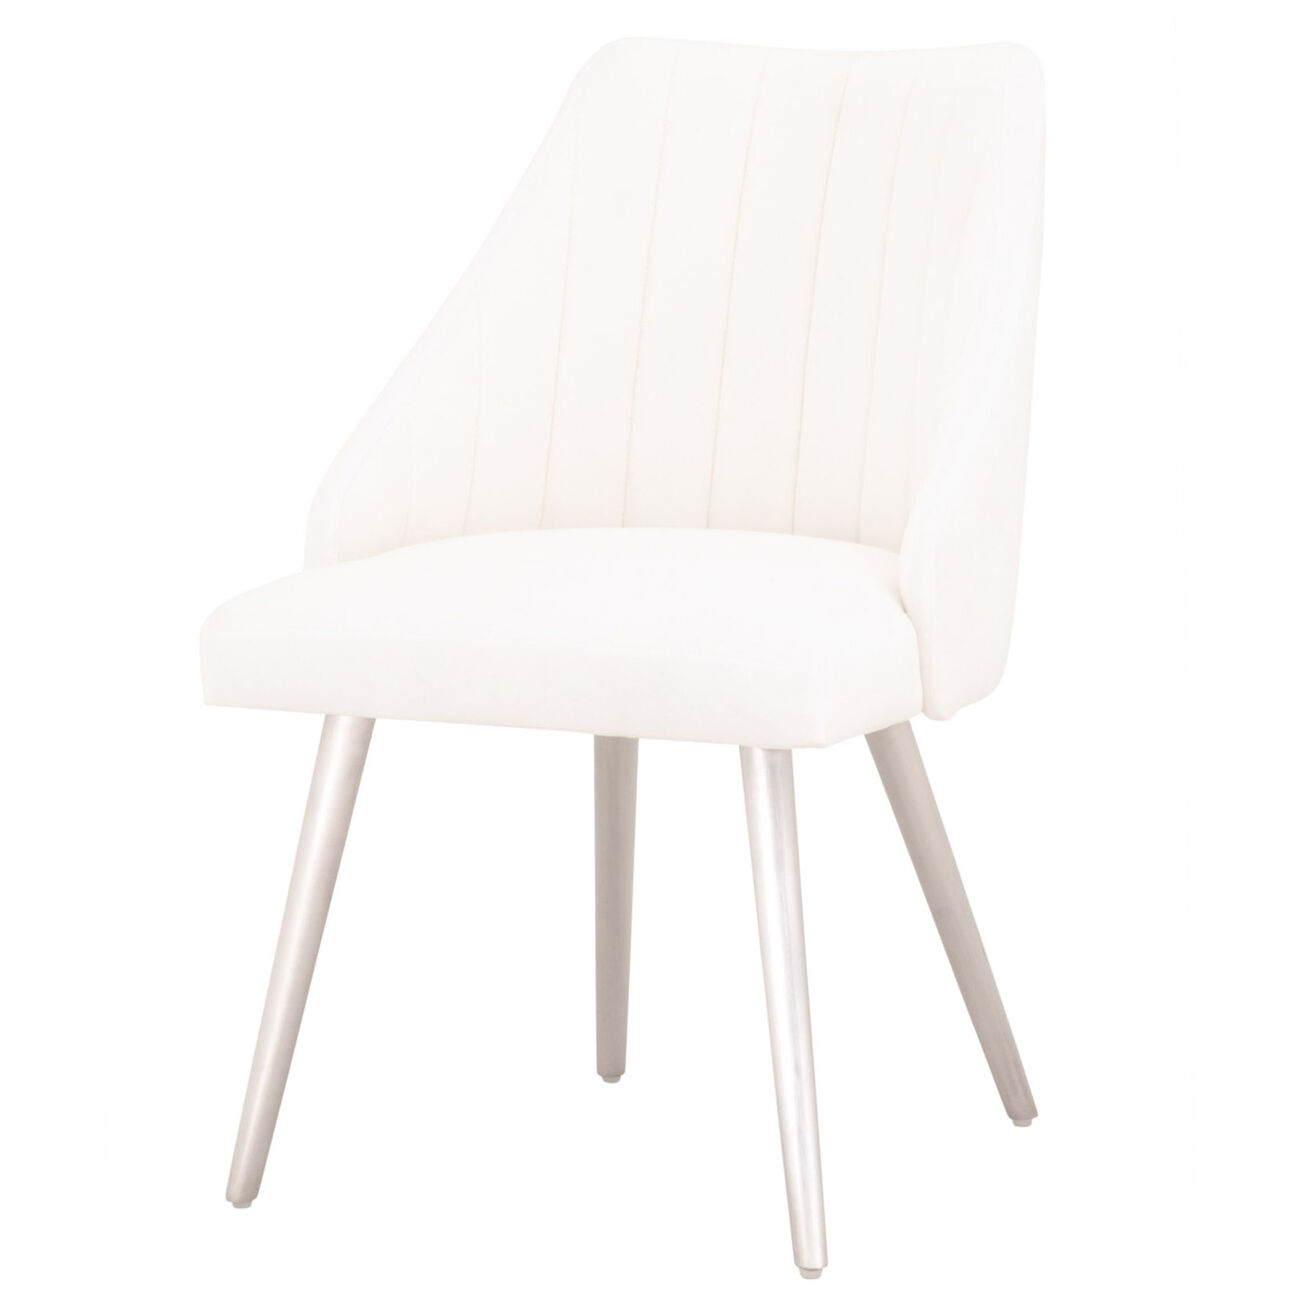 Channel Tufted Dining Chair with Metal Legs, Set of 2, White and Silver